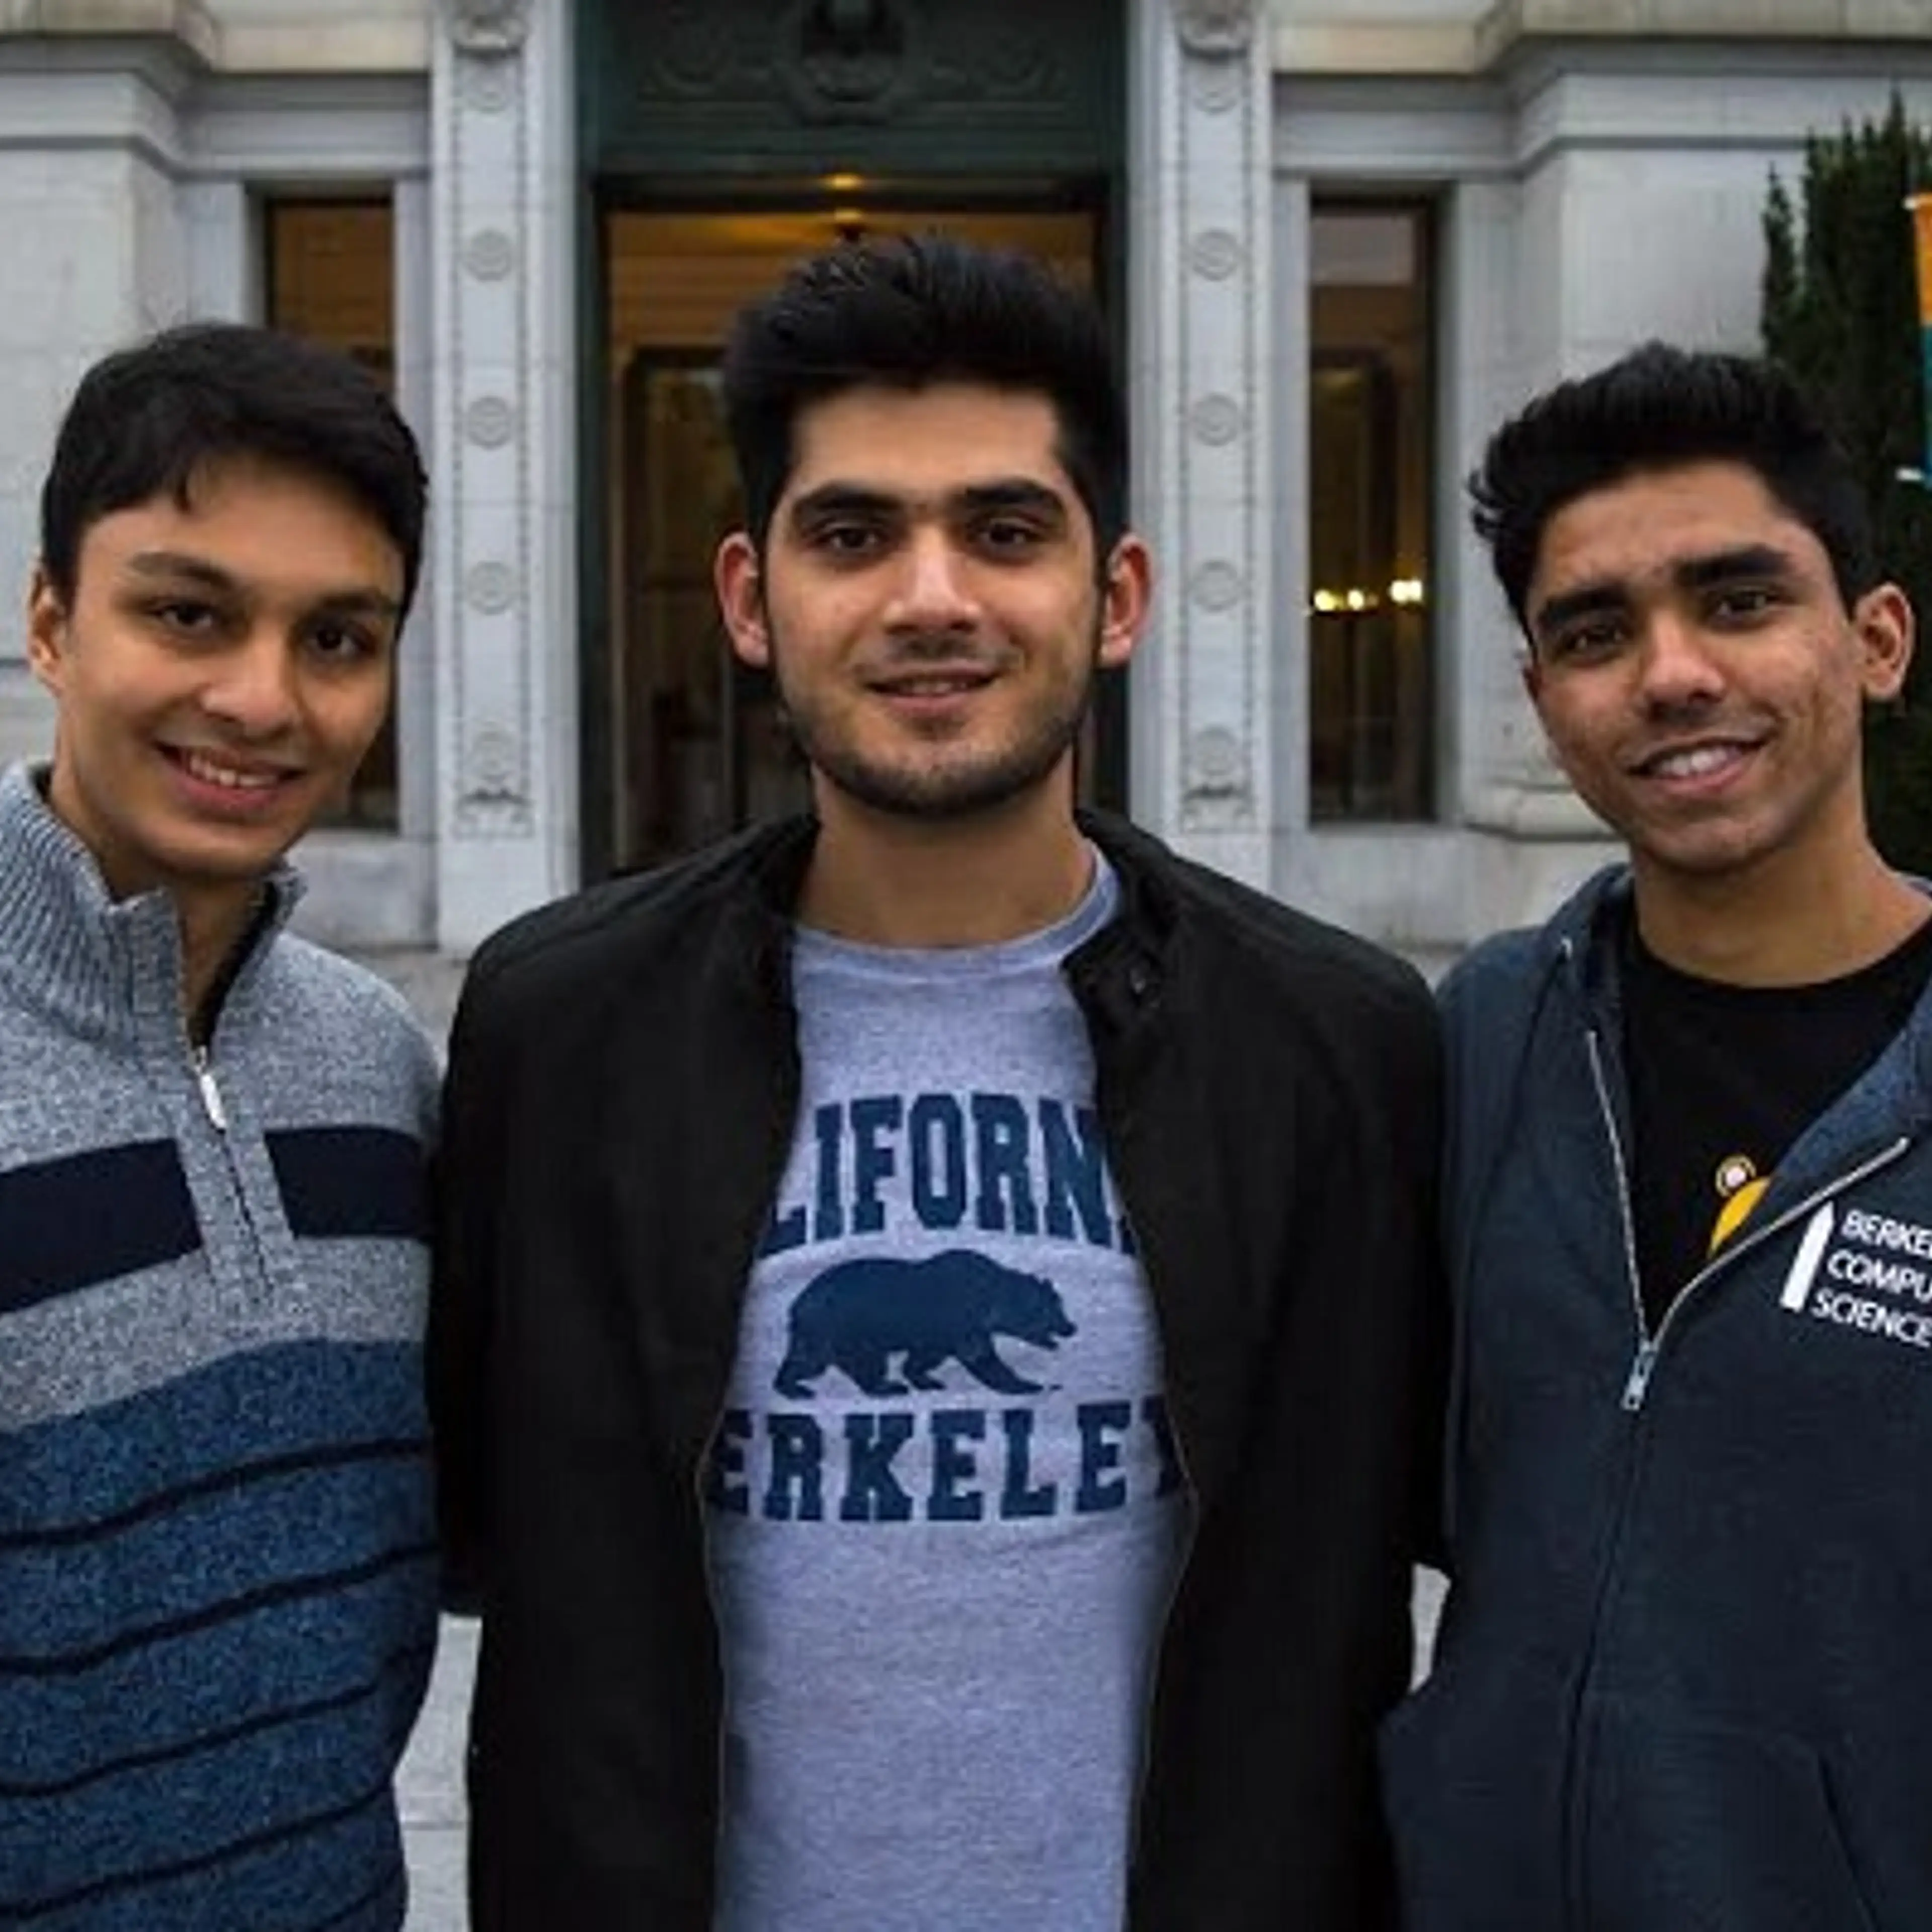 Shooting for the moon, these three 20-year-olds at Berkeley University are powering Indian tech startups with their accelerator